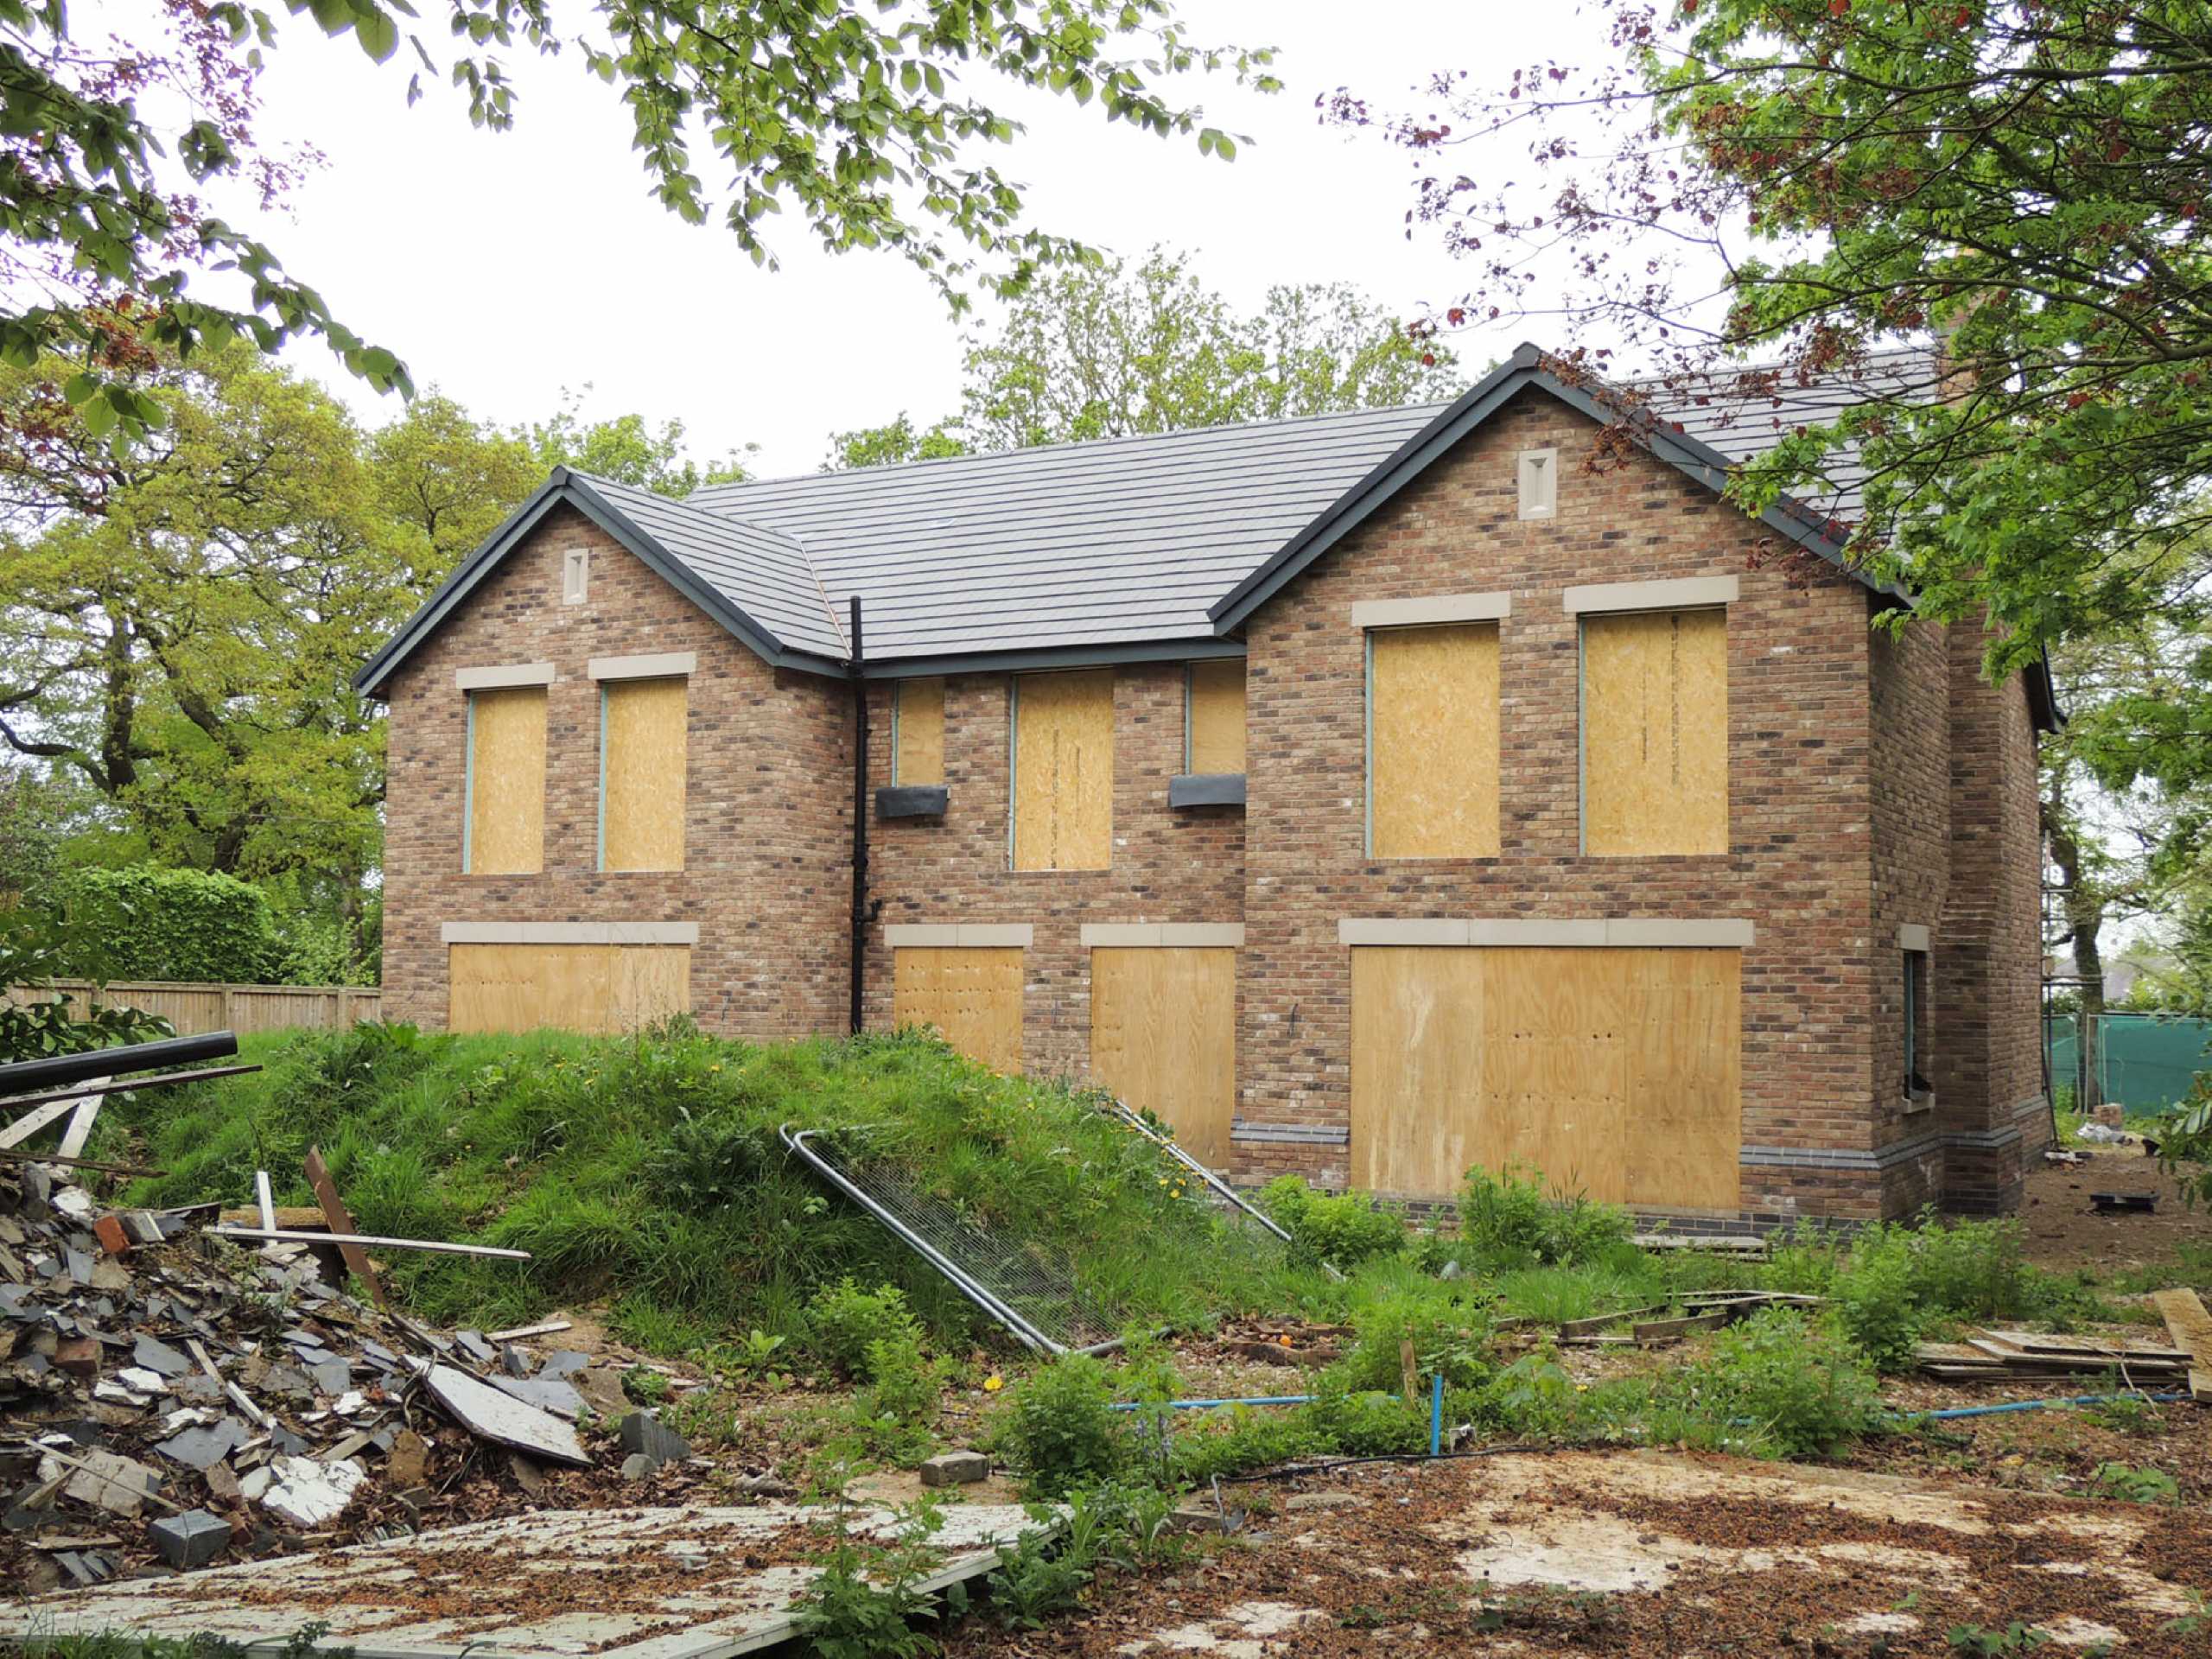 external image of a detached family home